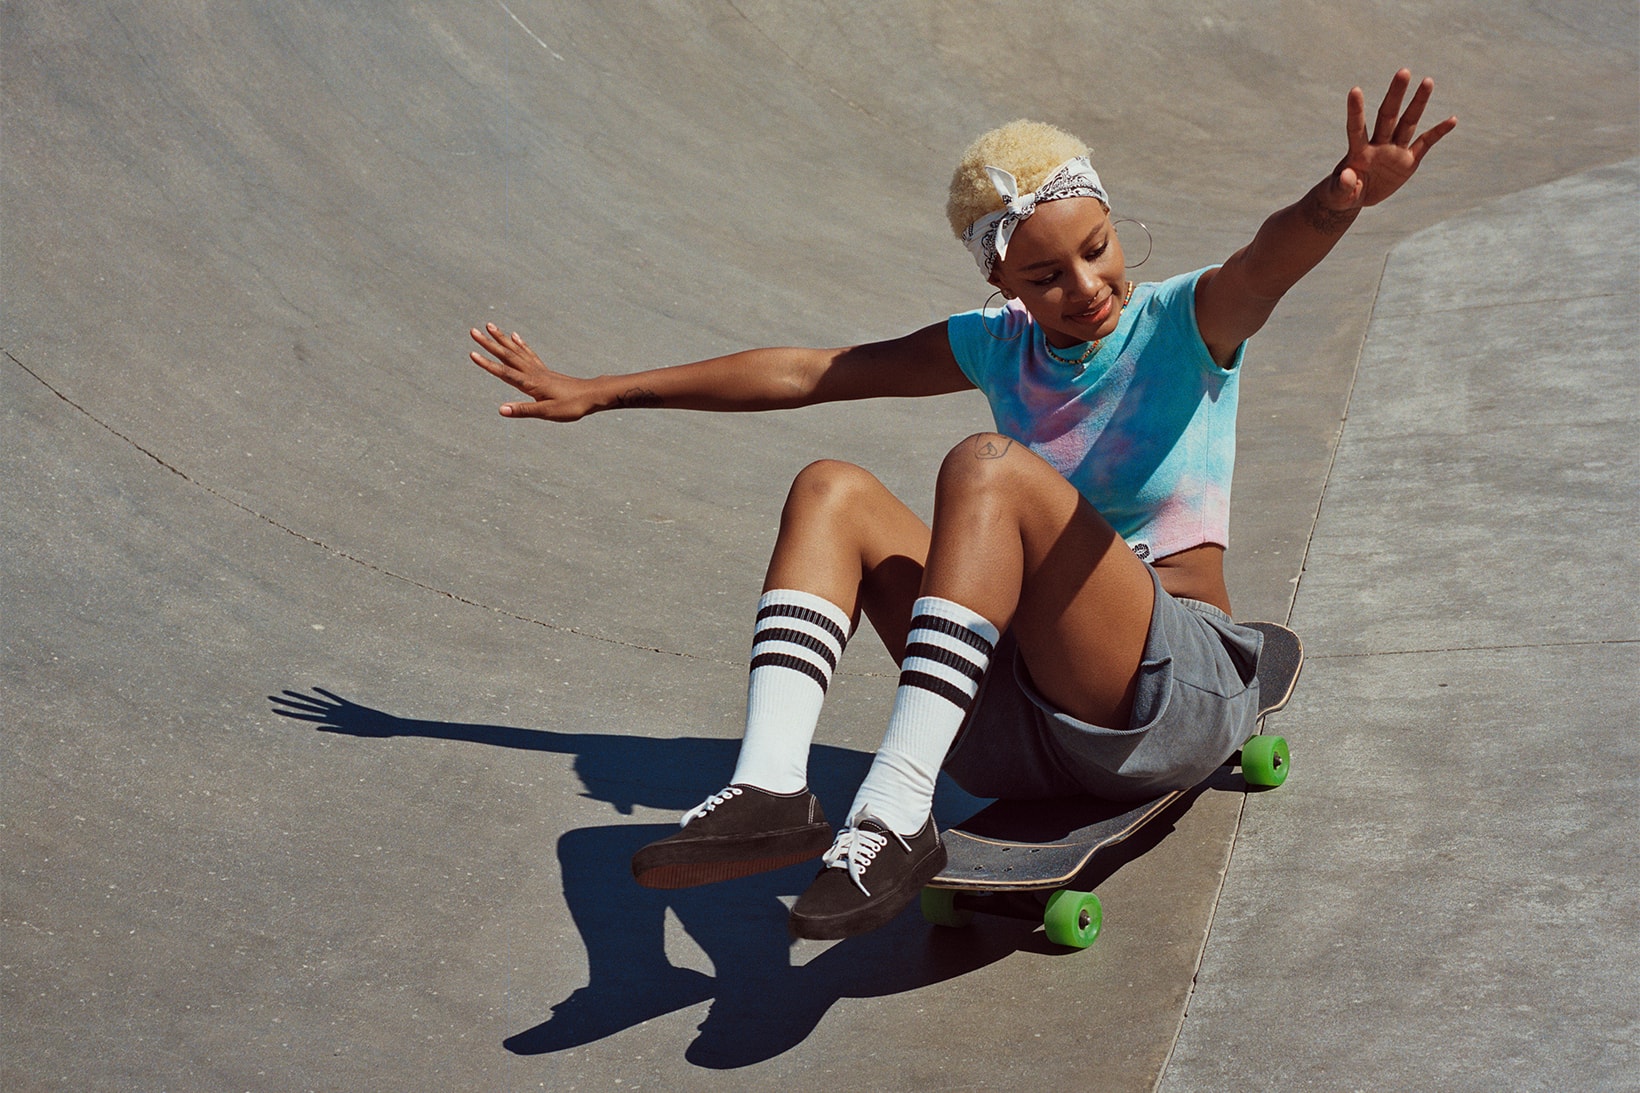 H&M Black Girls Skate Campaign Collection